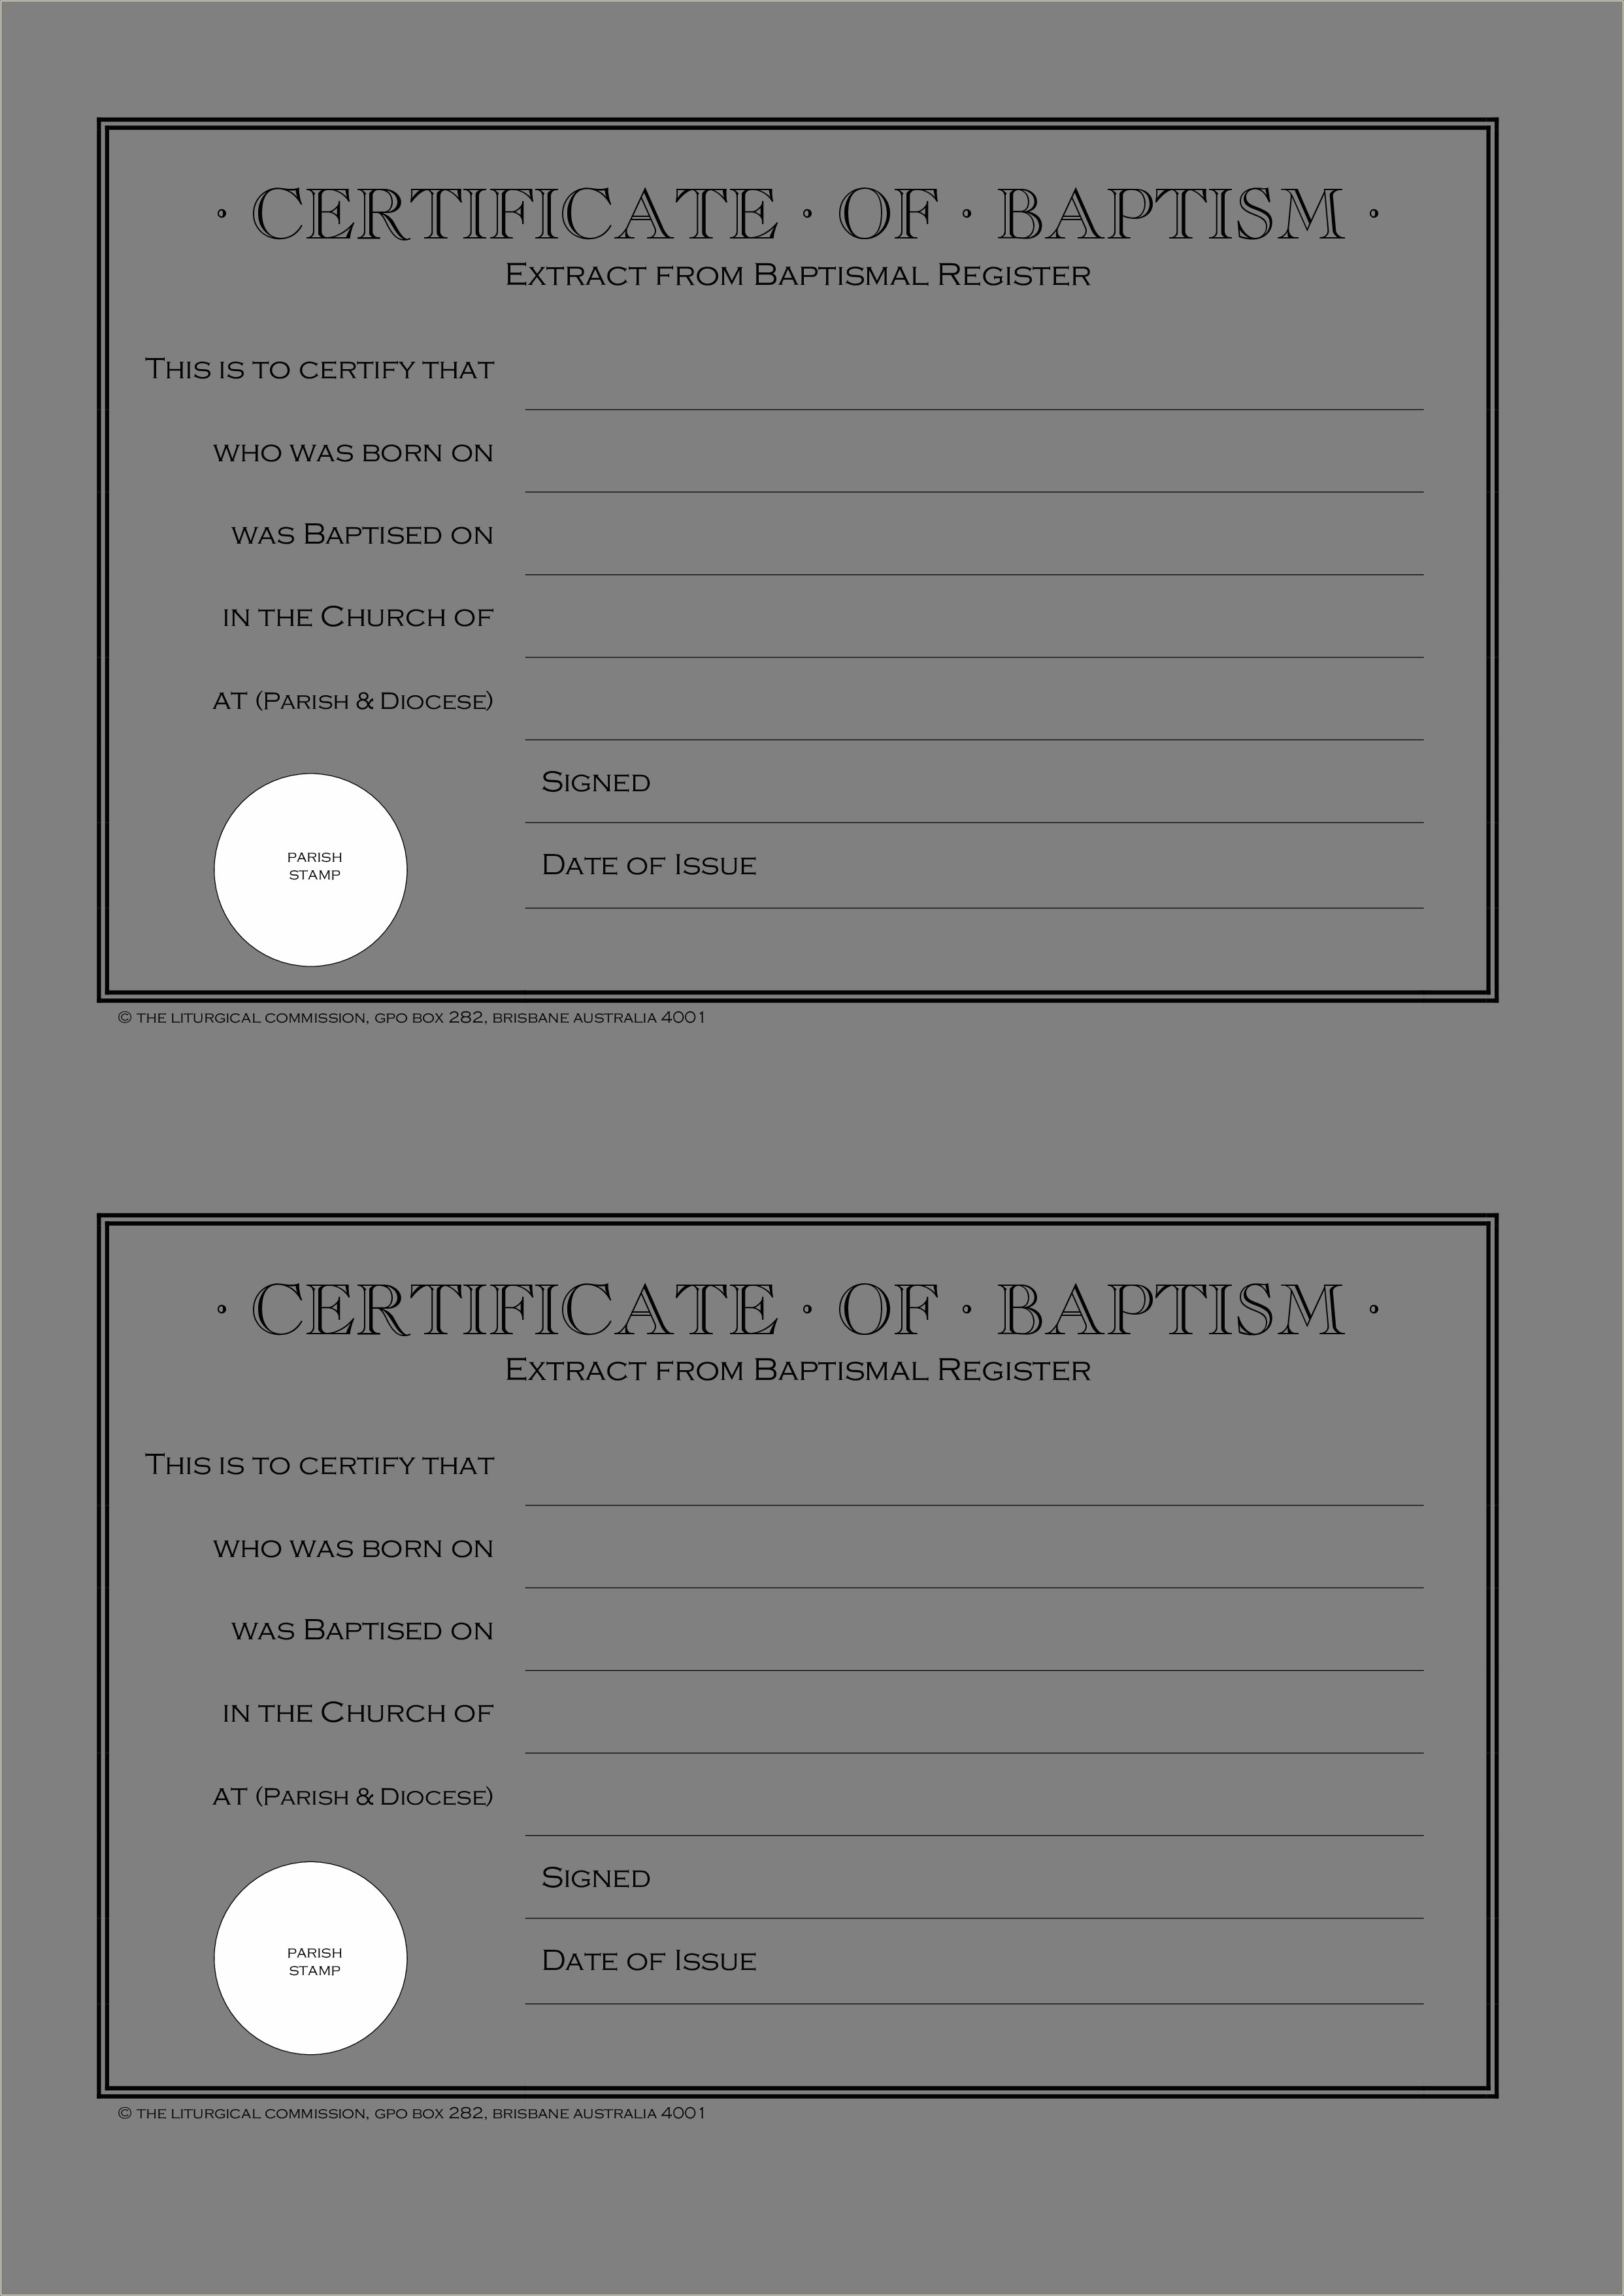 Certificate Of Baptism Word Template Free